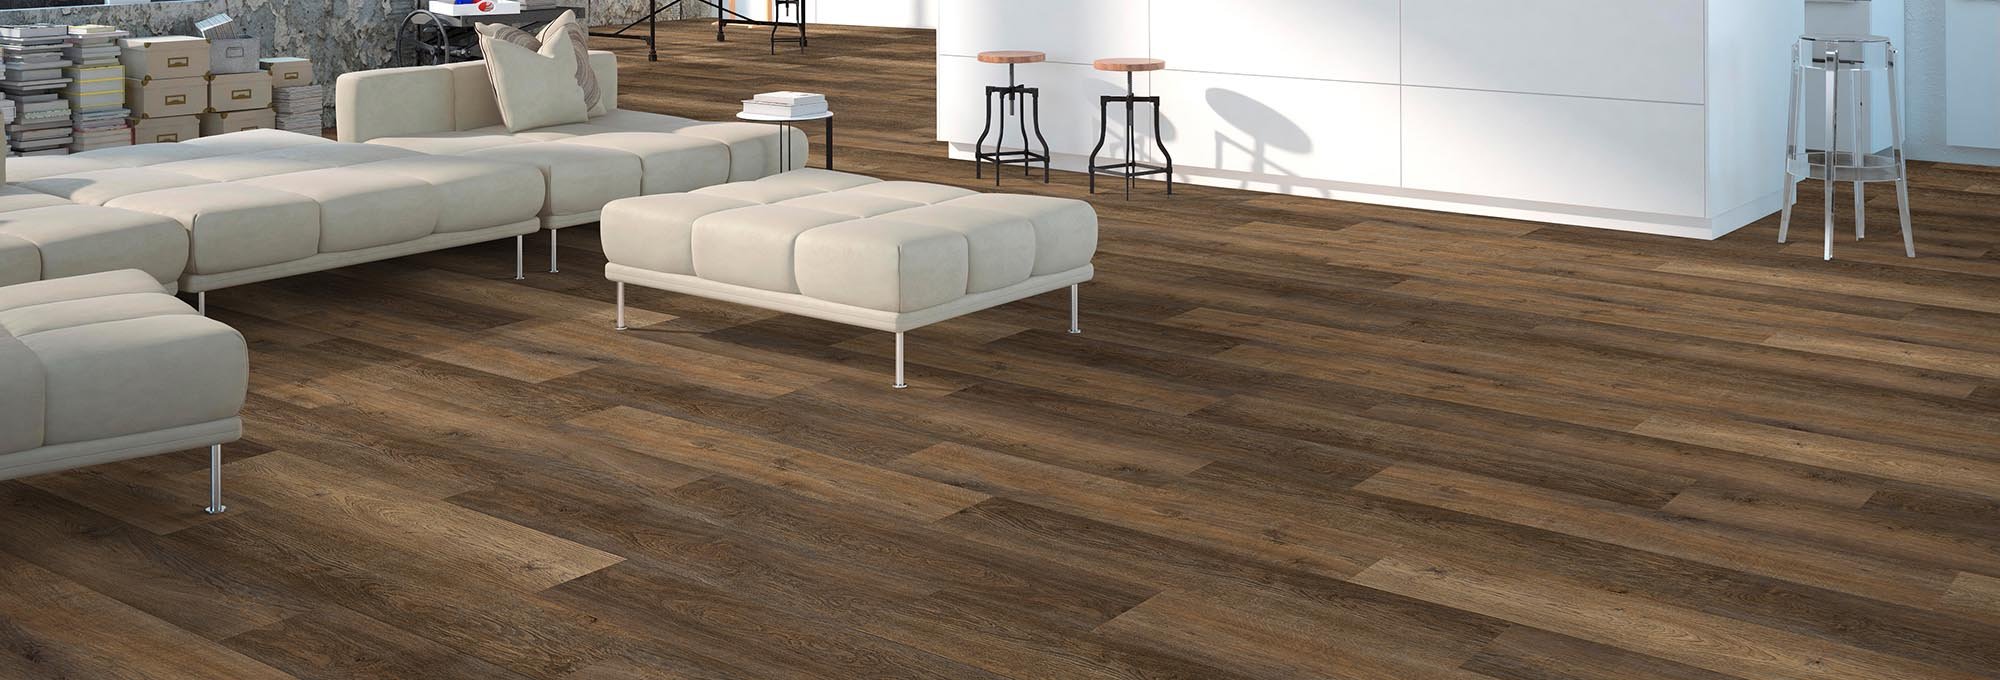 Shop Flooring Products from Smiddy's CarpetsPlus COLORTILE in Terre Haute, IN